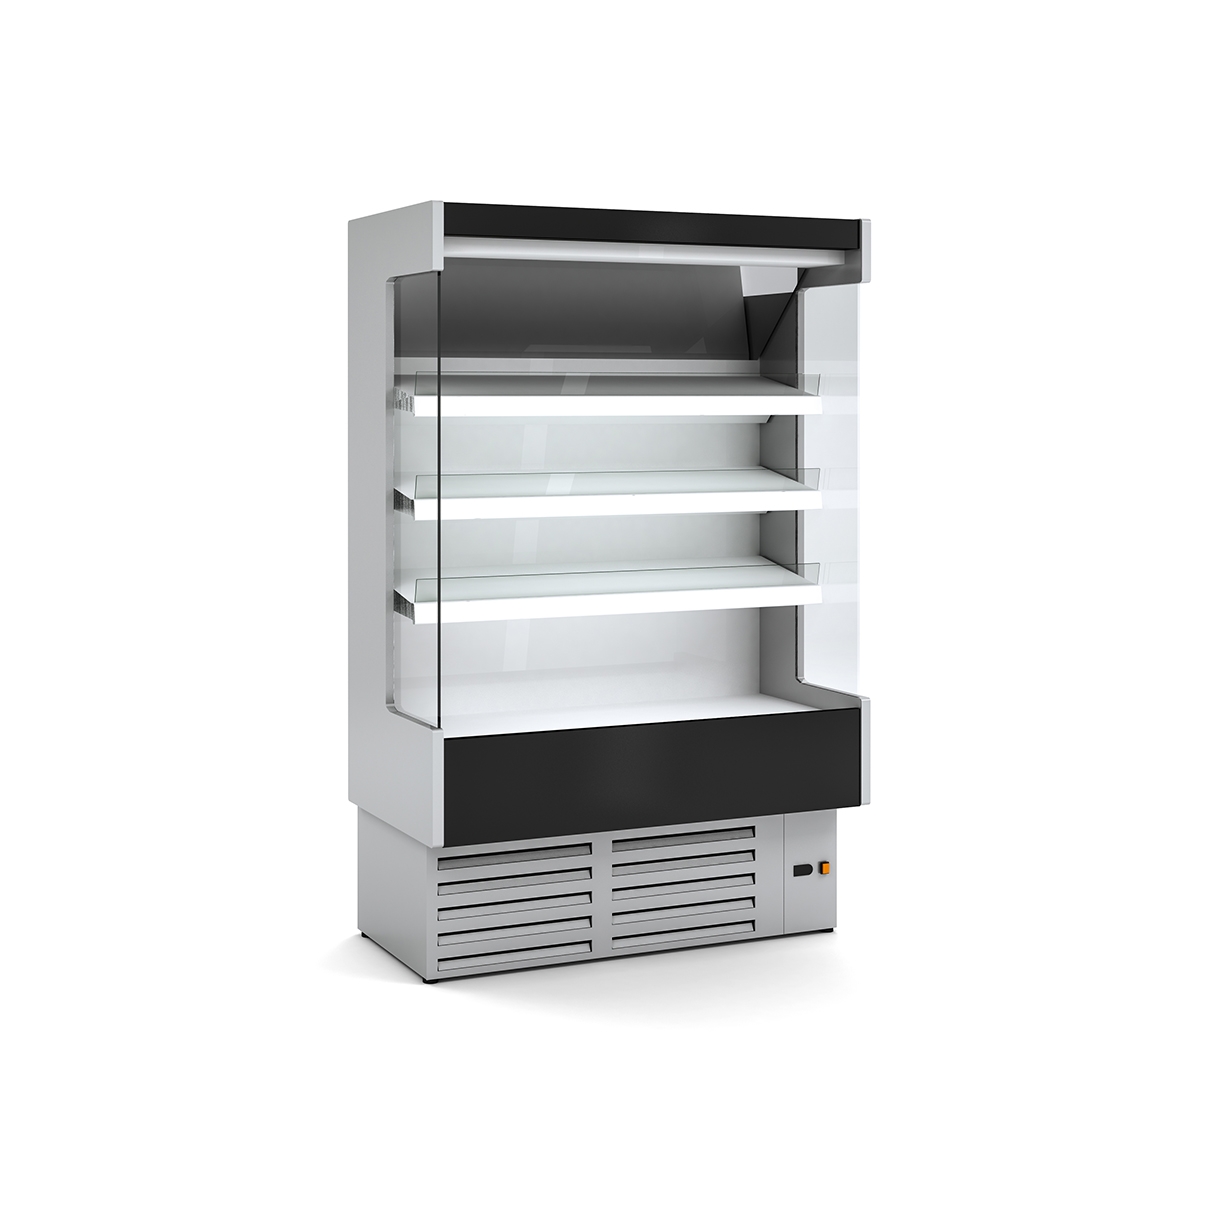 REFRIGERATED WALL CABINET DS3 H1